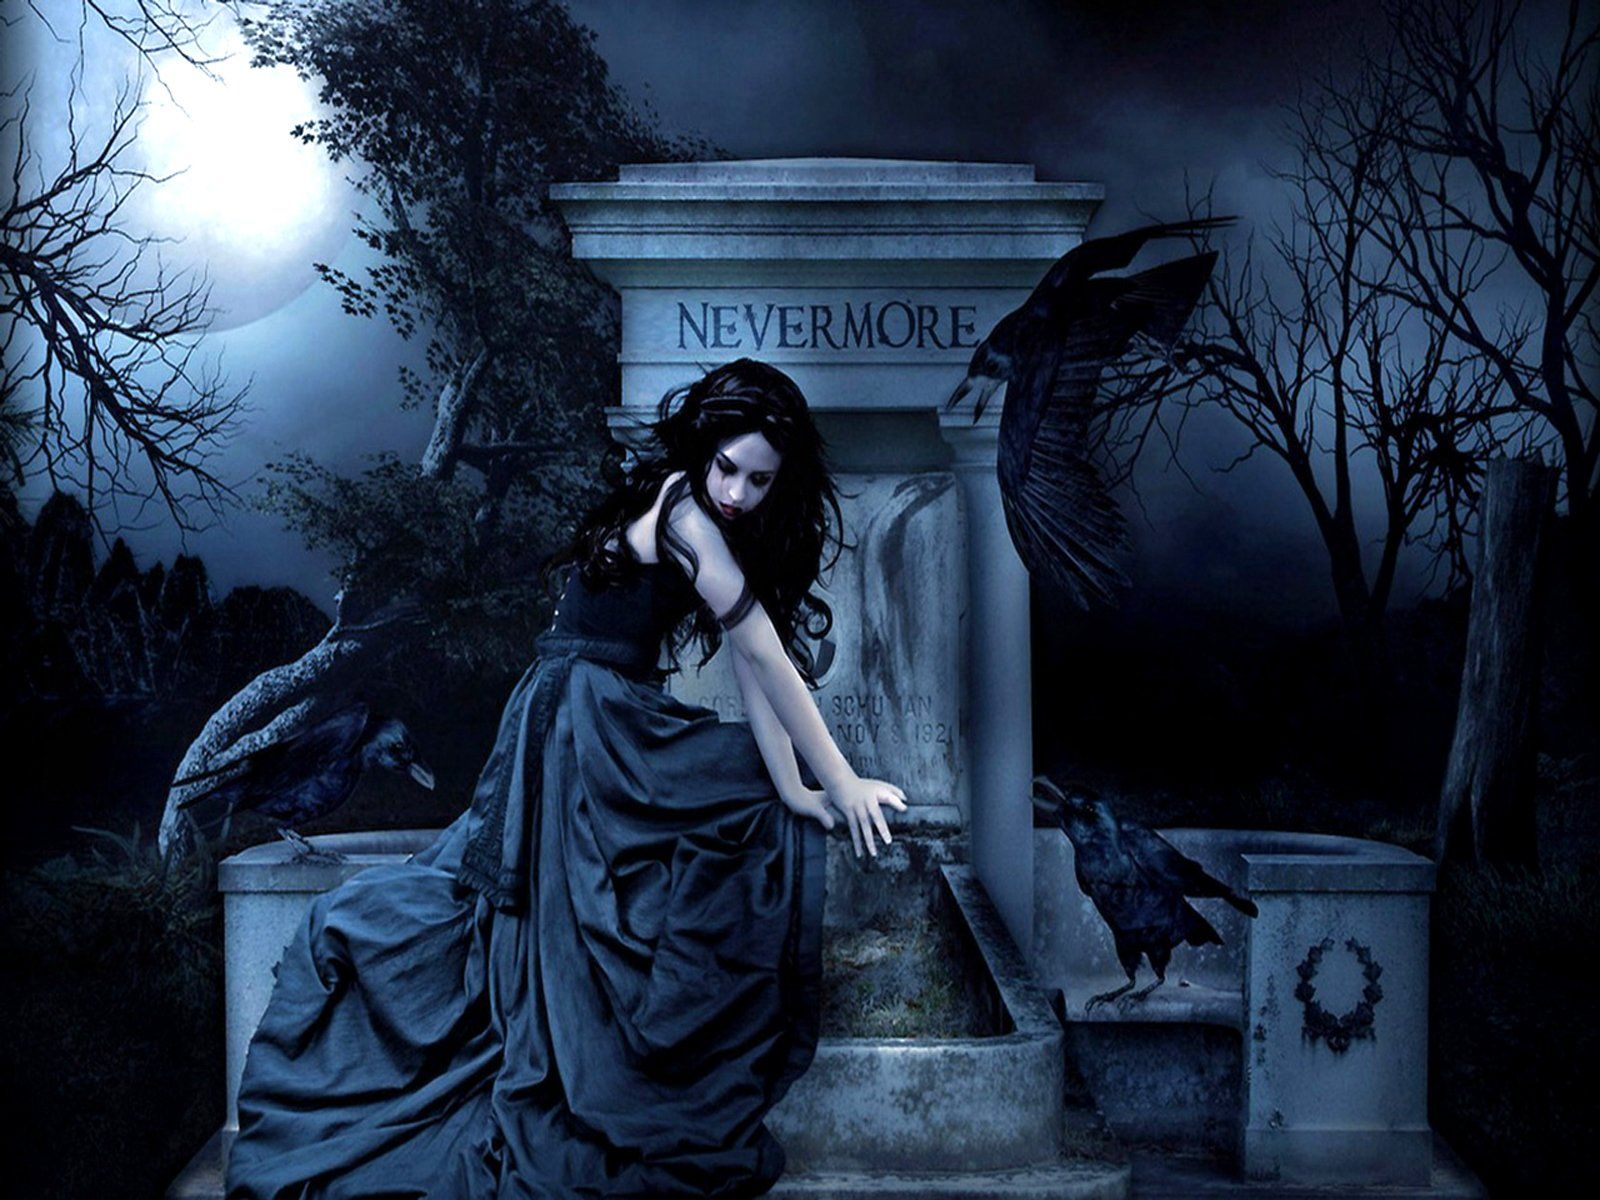 Gothic Witch Wallpapers